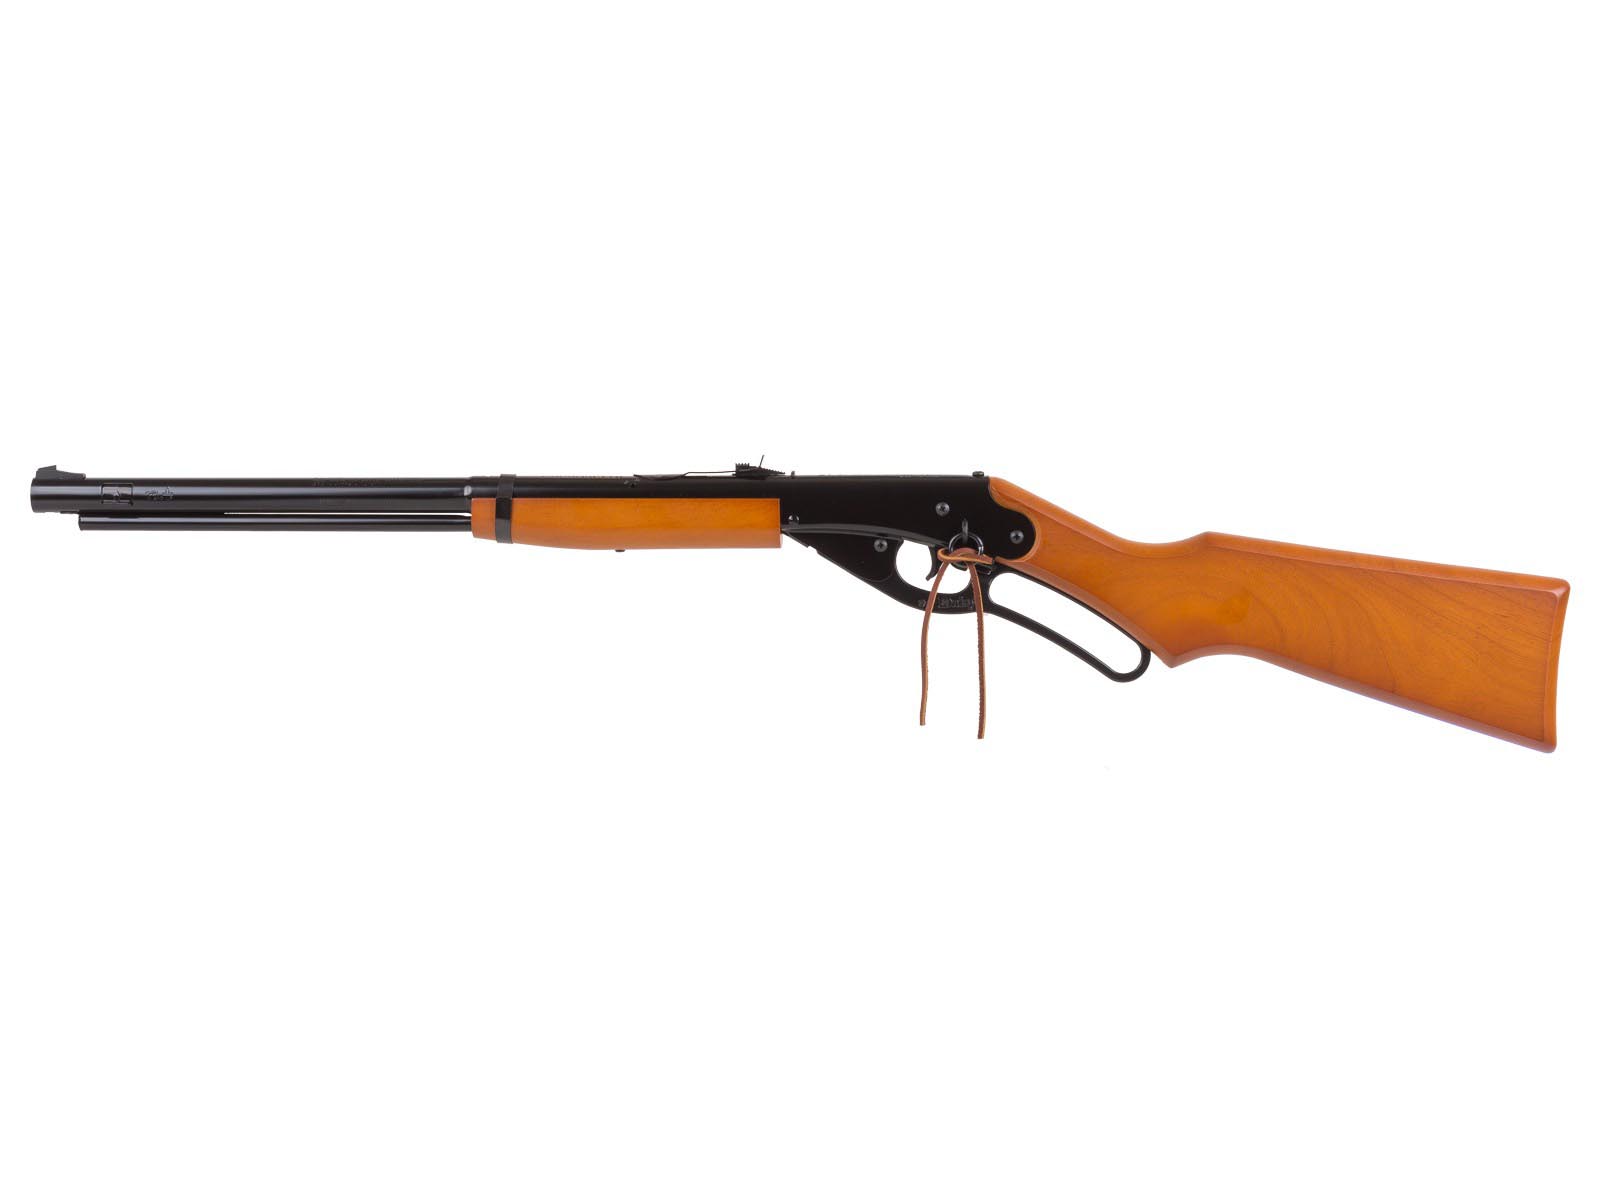 Daisy Adult Red Ryder BB Rifle